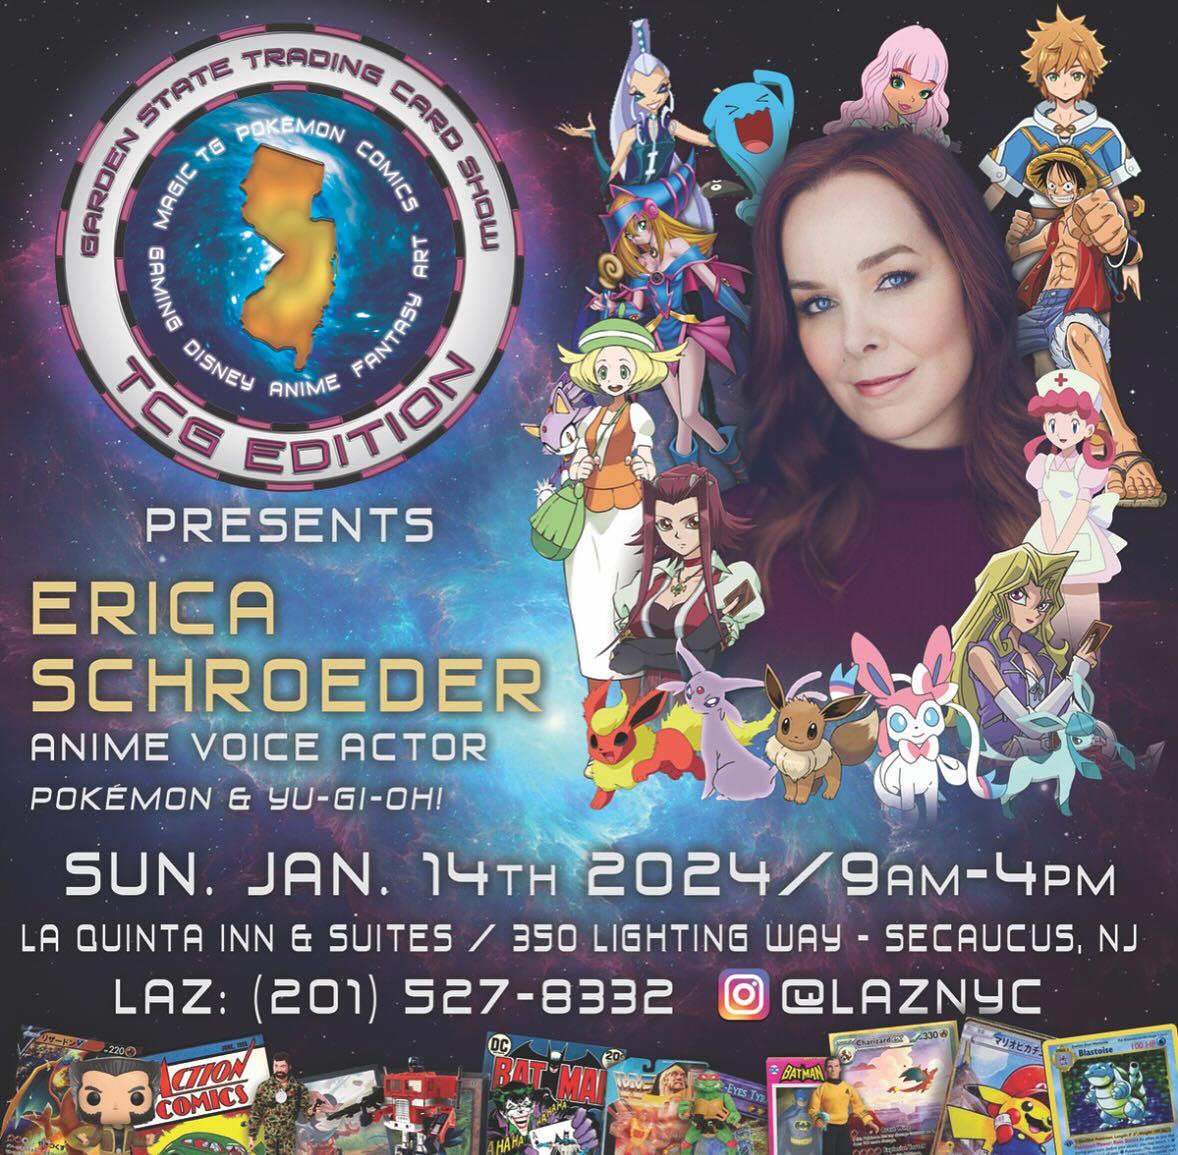 event poster image